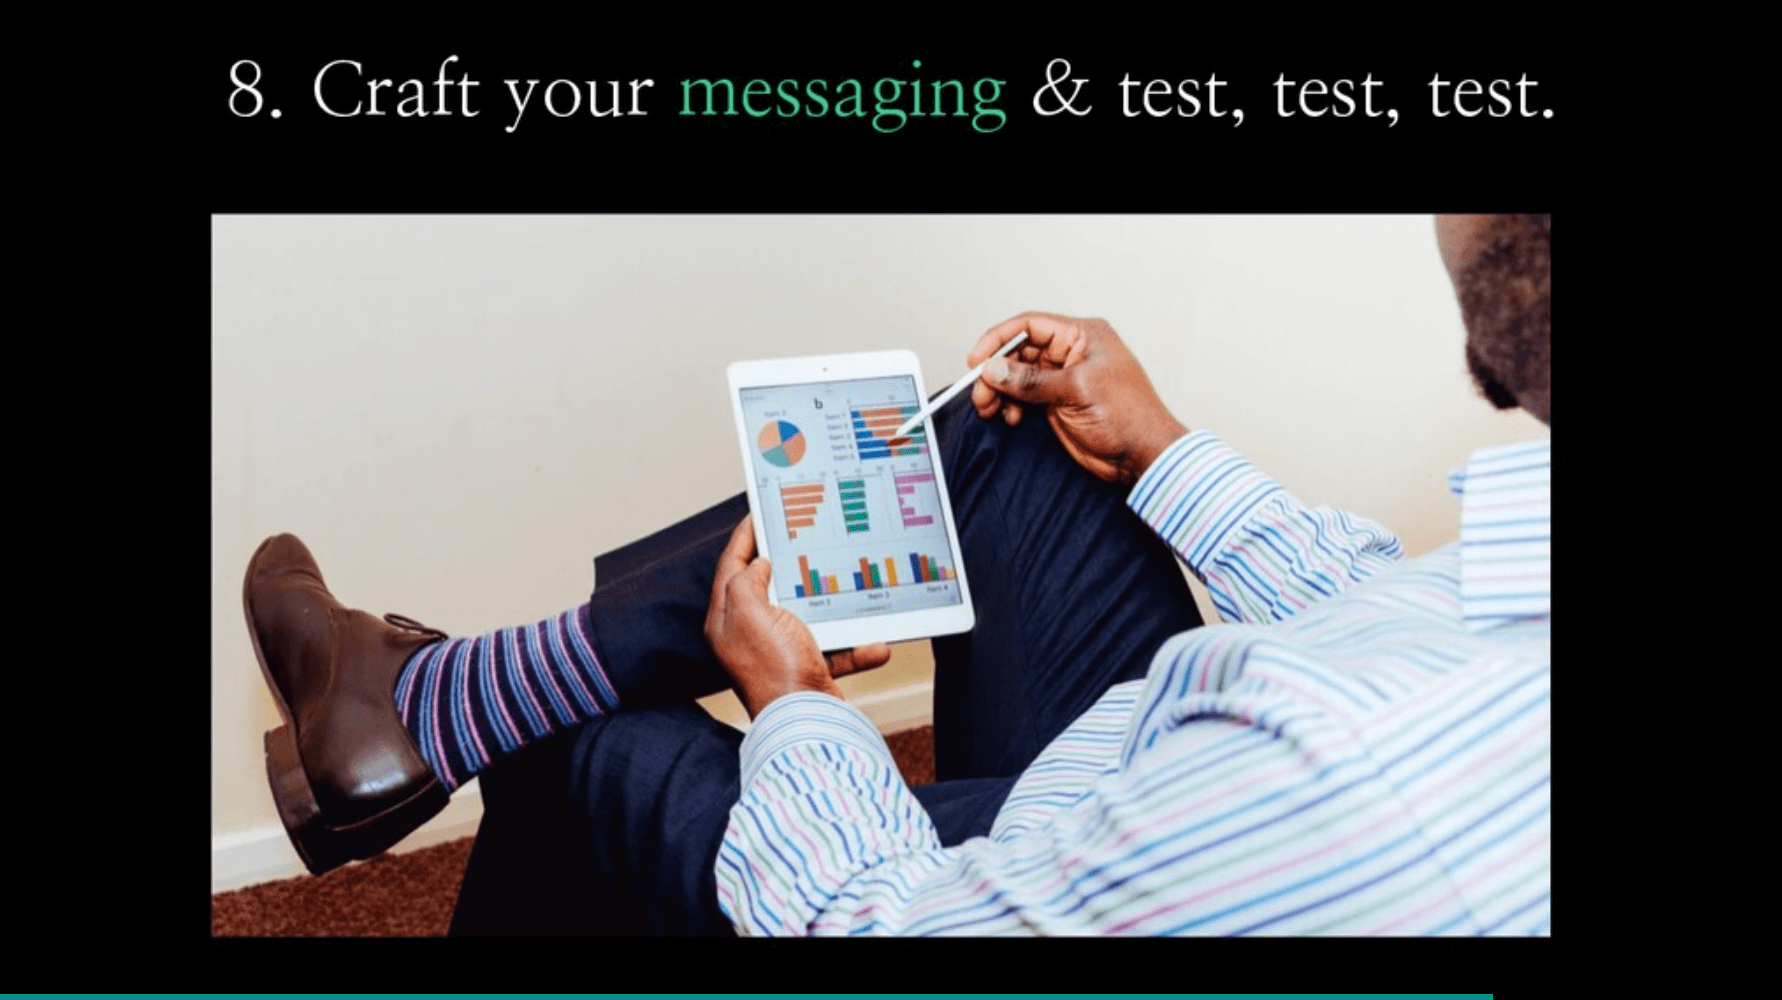 Craft your messaging and test, test, test.